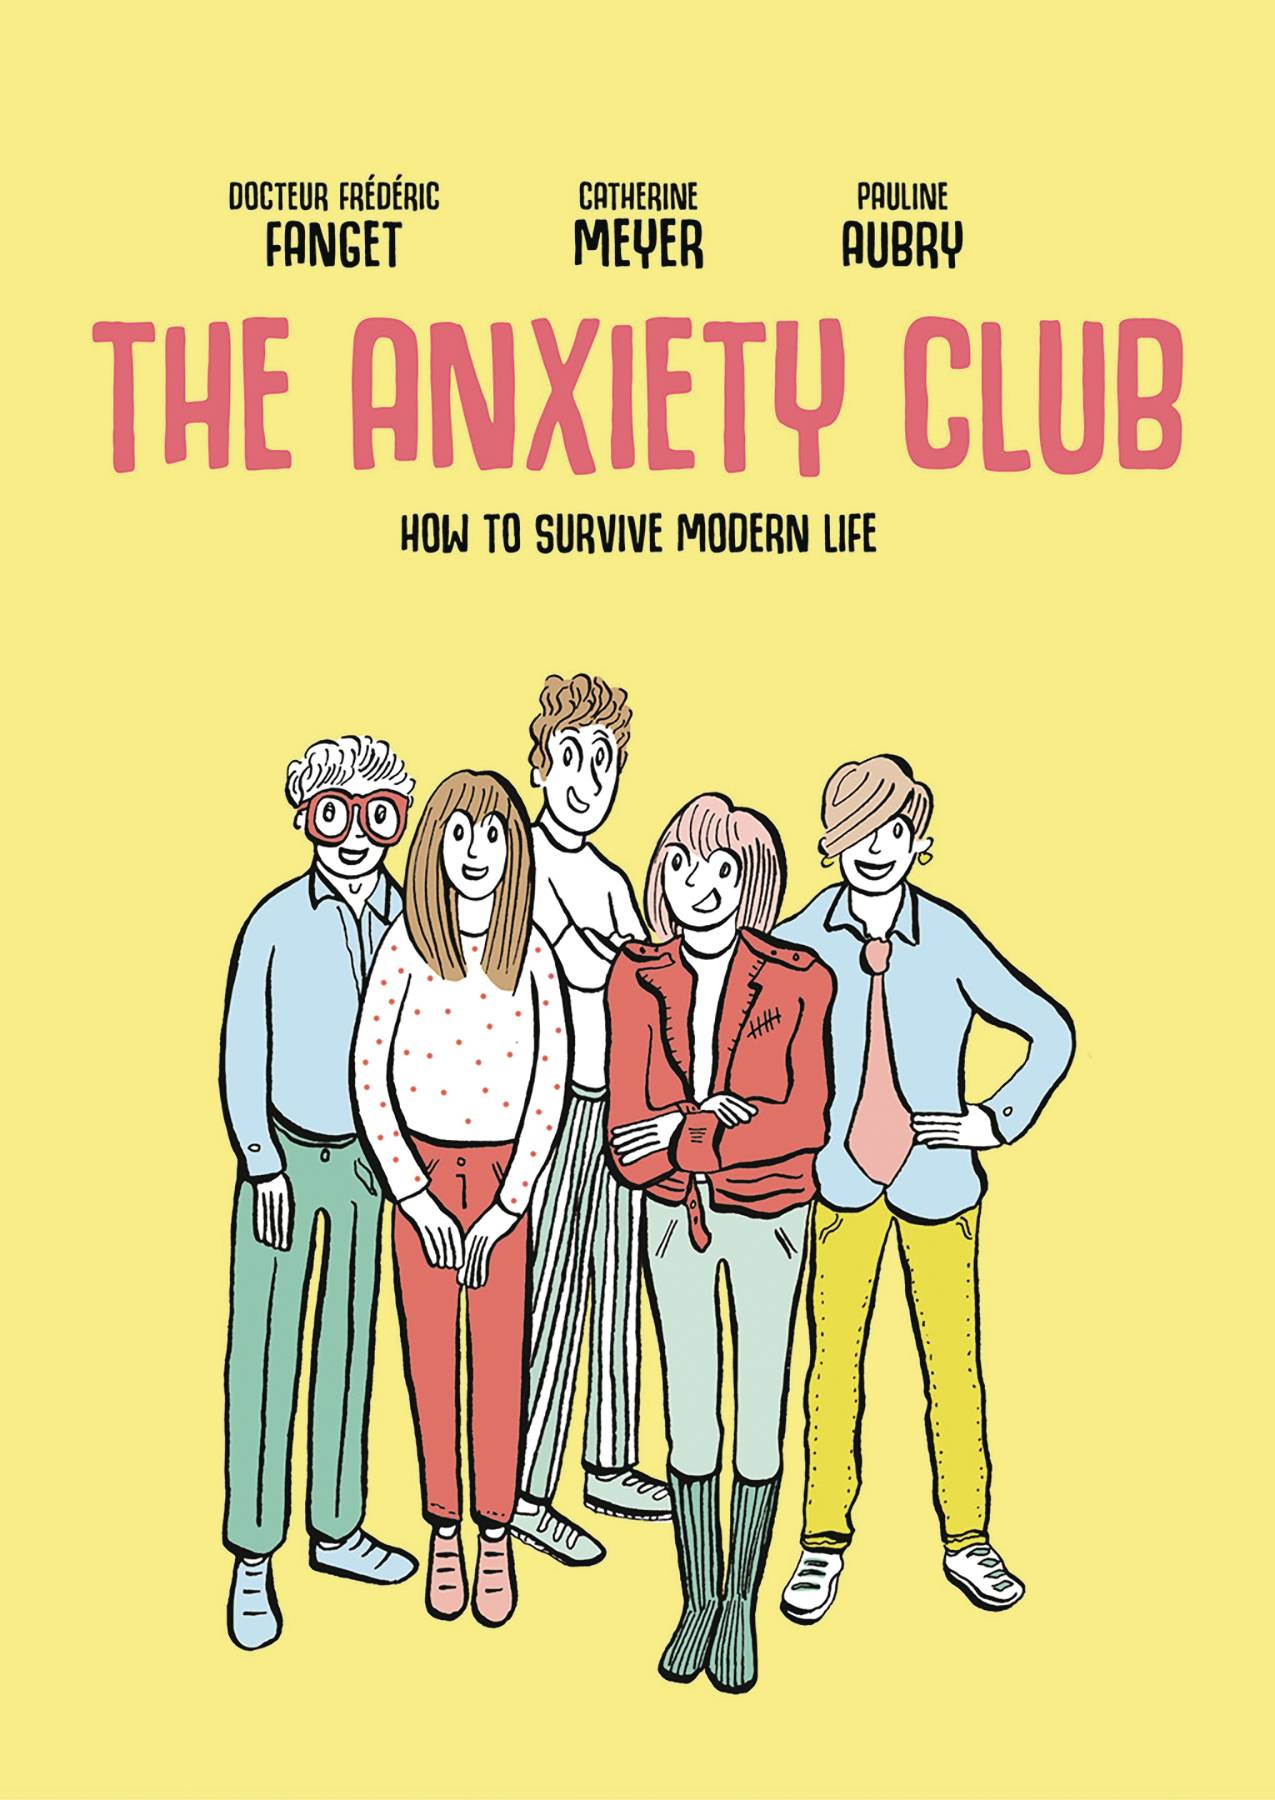 ANXIETY CLUB HOW TO SURVIVE MODERN LIFE TP